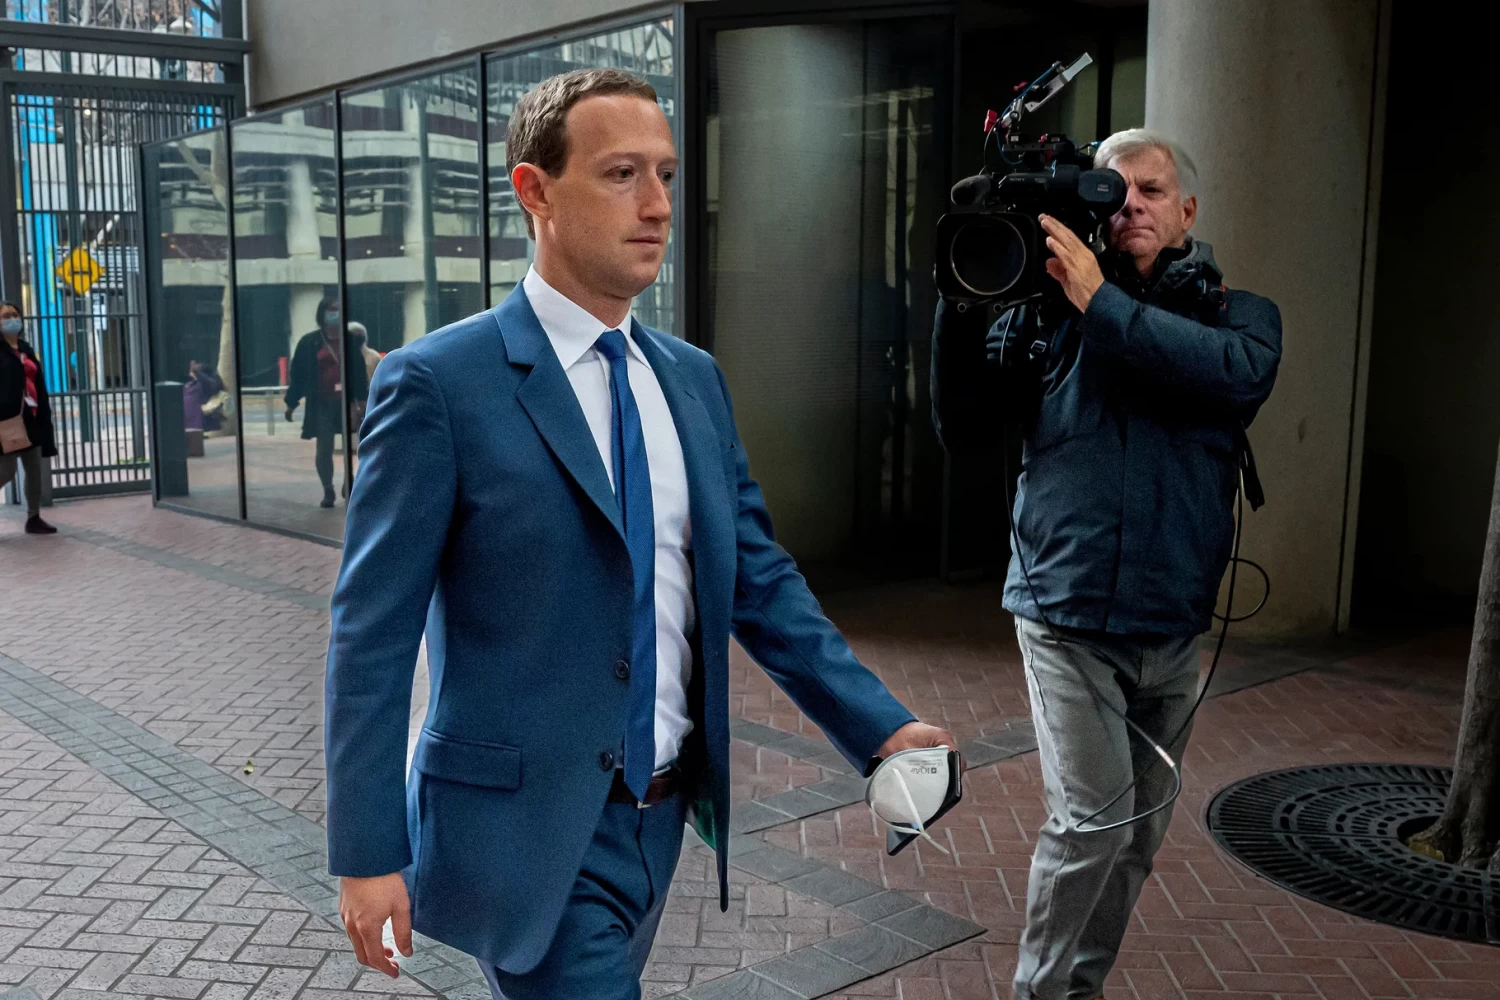 Mark Zuckerberg leaving a federal courthouse in San Jose in February 2022. David Paul Morris/Bloomberg via Getty Images